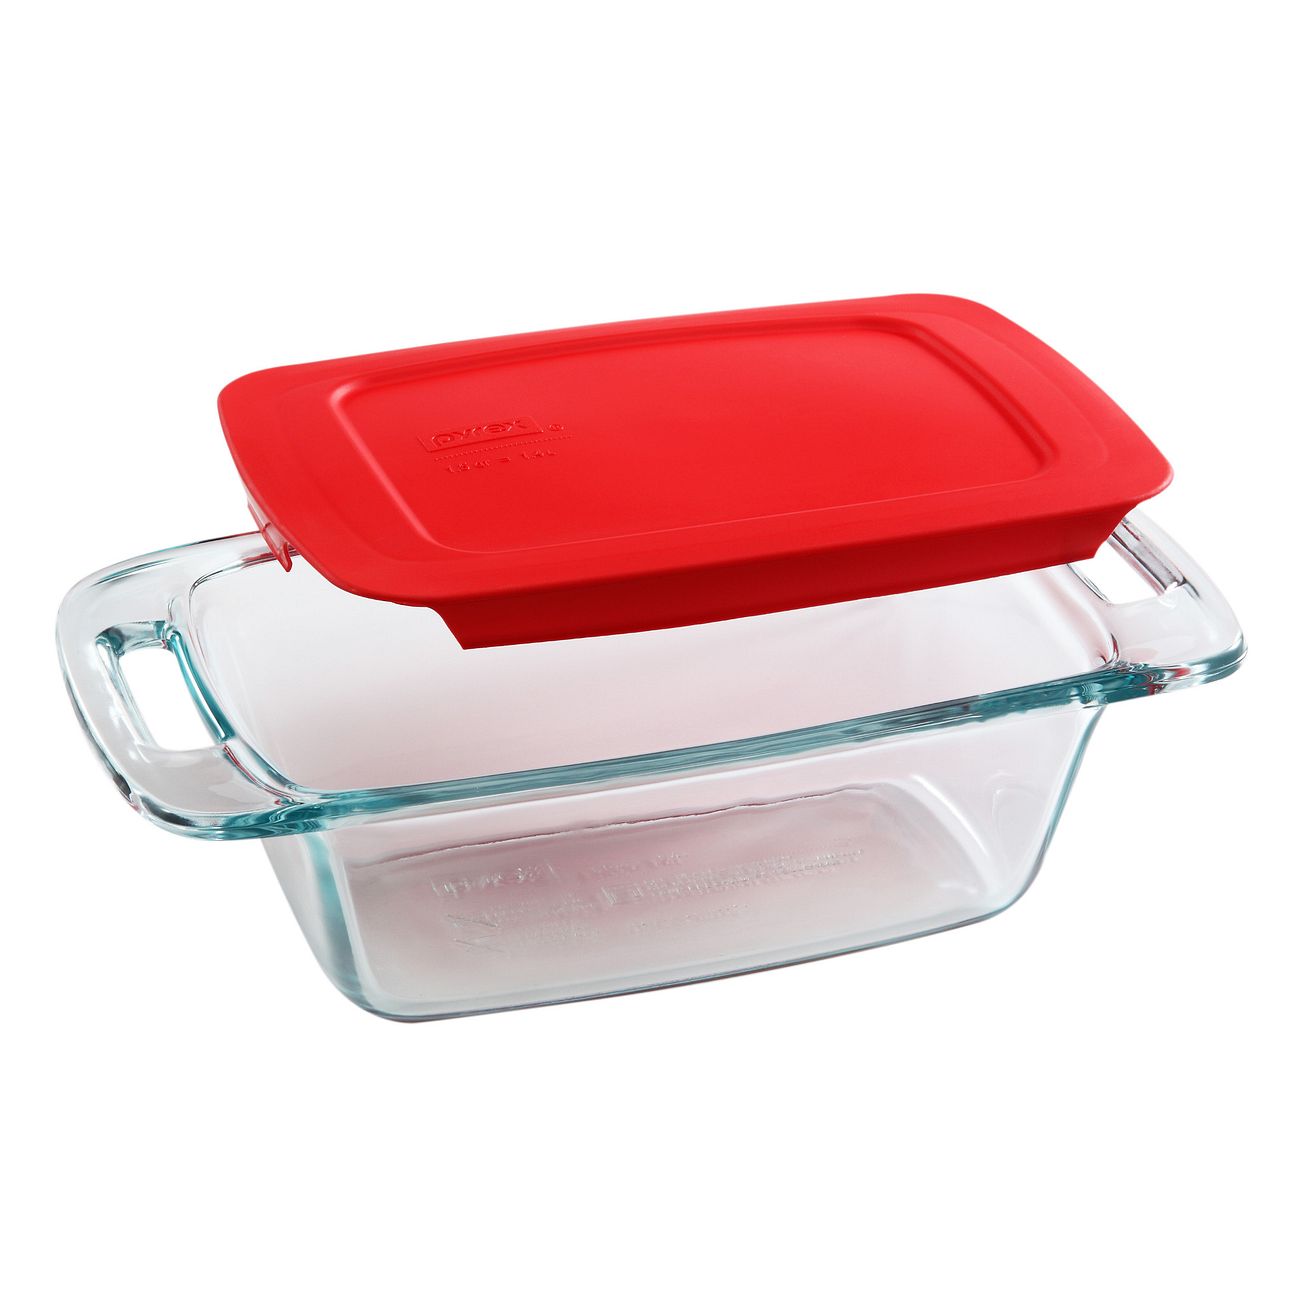 Easy Grab 1 5 Quart Glass Loaf Pan With Red Lid Corelle